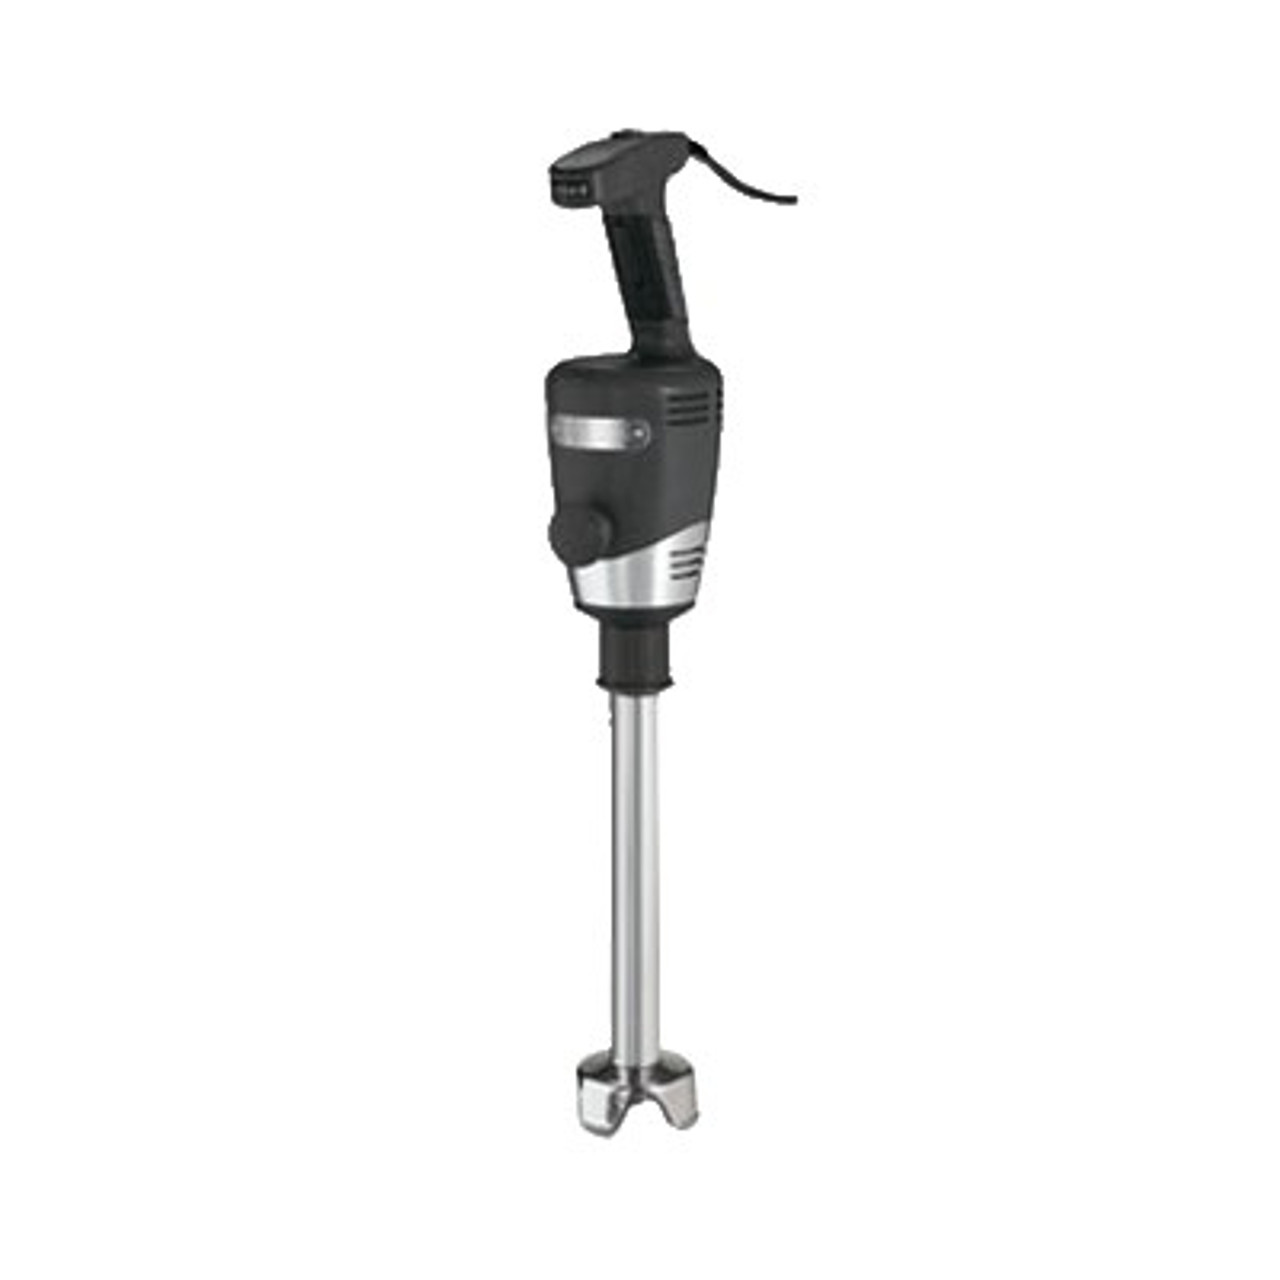 Big Stix® Immersion Blender, heavy duty, 40 qt. (10 gallon) capacity, 12" stainless steel removable shaft, variable speed motor, continuous ON feature, rubberized comfort grip, 1 HP, 120v, 750W, 6.25 amps, NSF